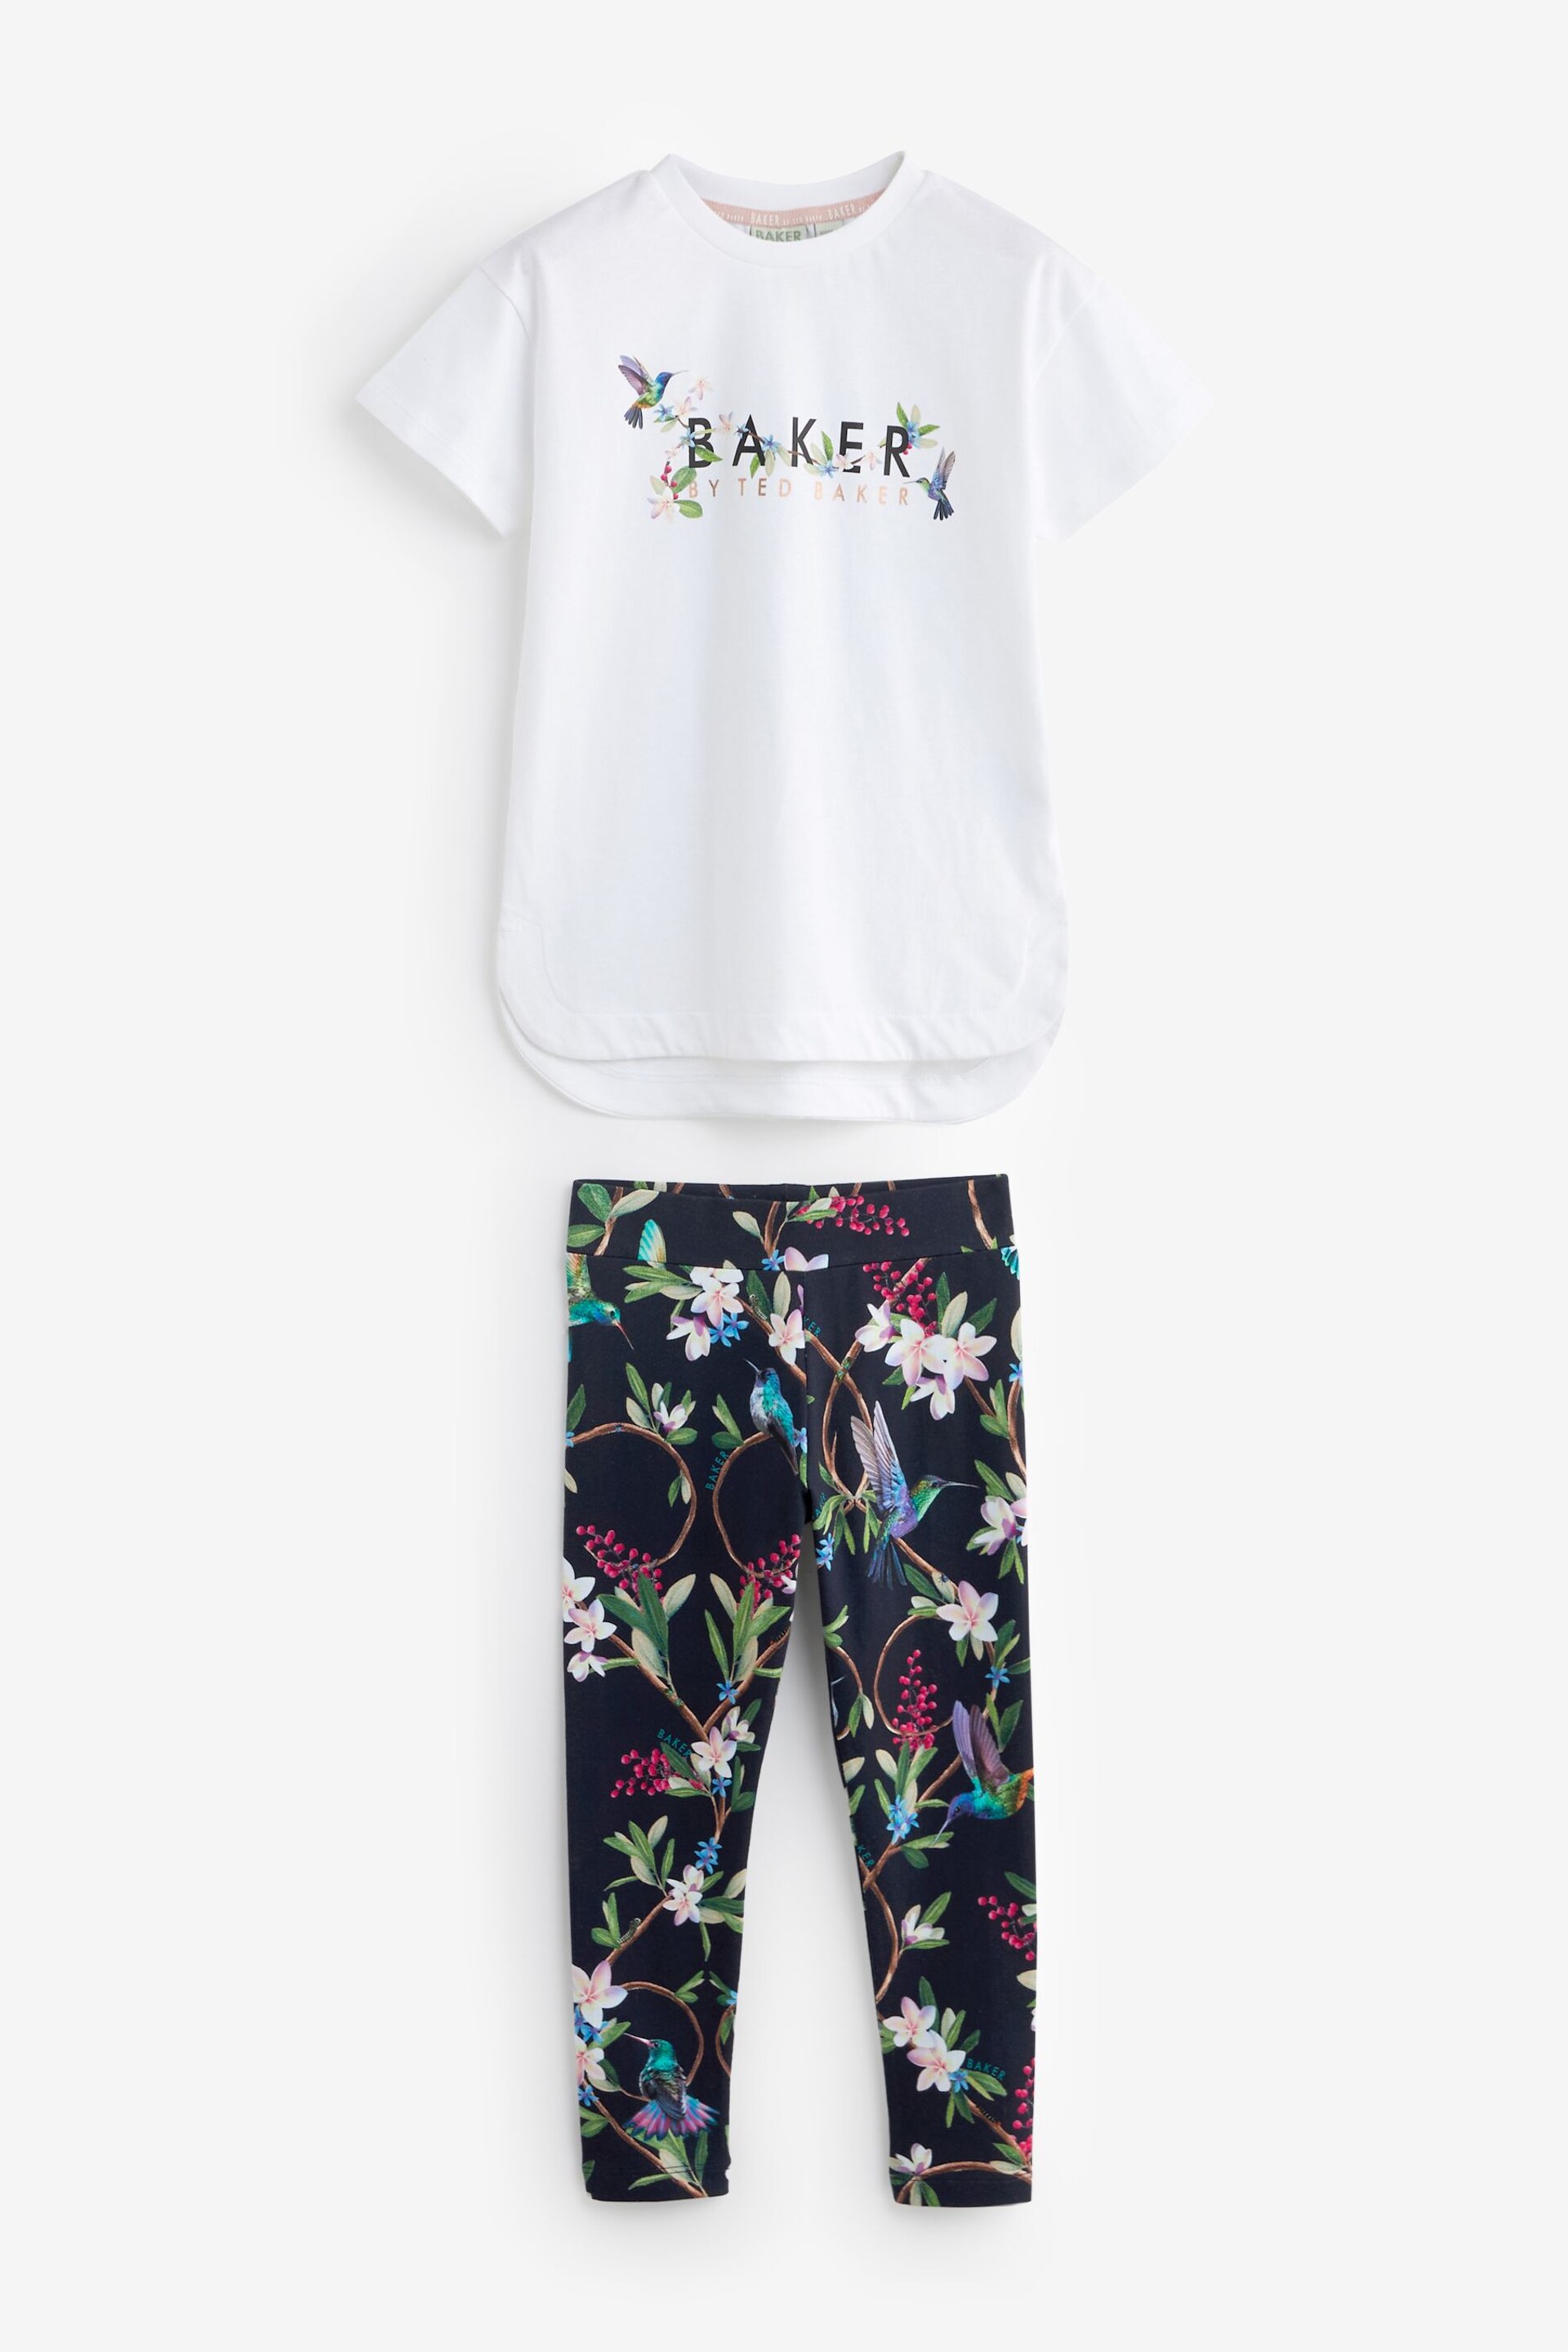 Baker by Ted Baker Navy Graphic T-Shirt and Legging Set - Image 8 of 11